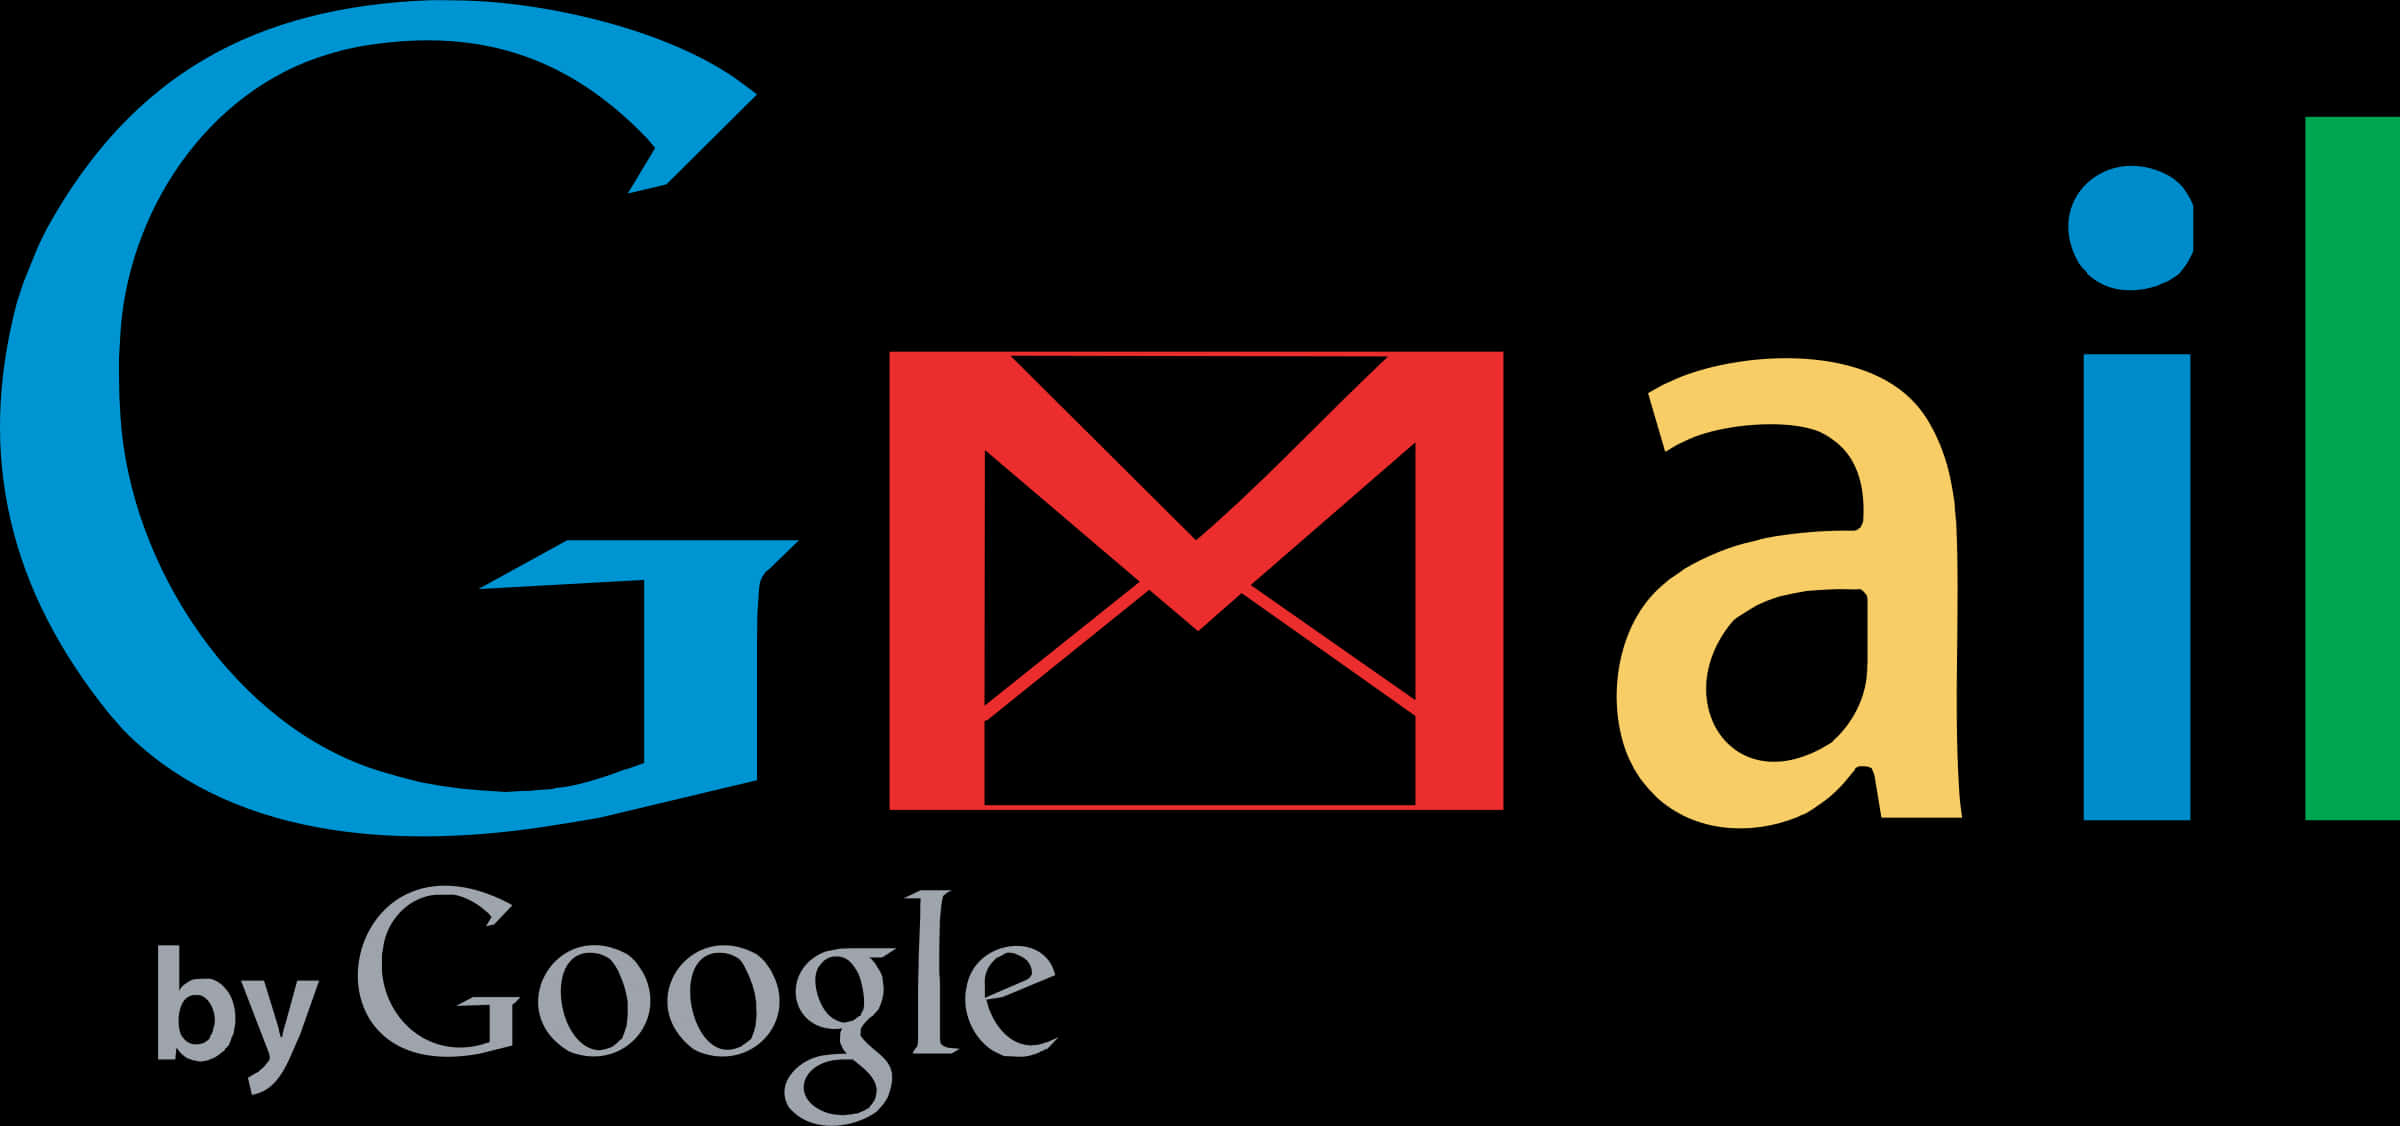 Gmail Logo Official PNG image